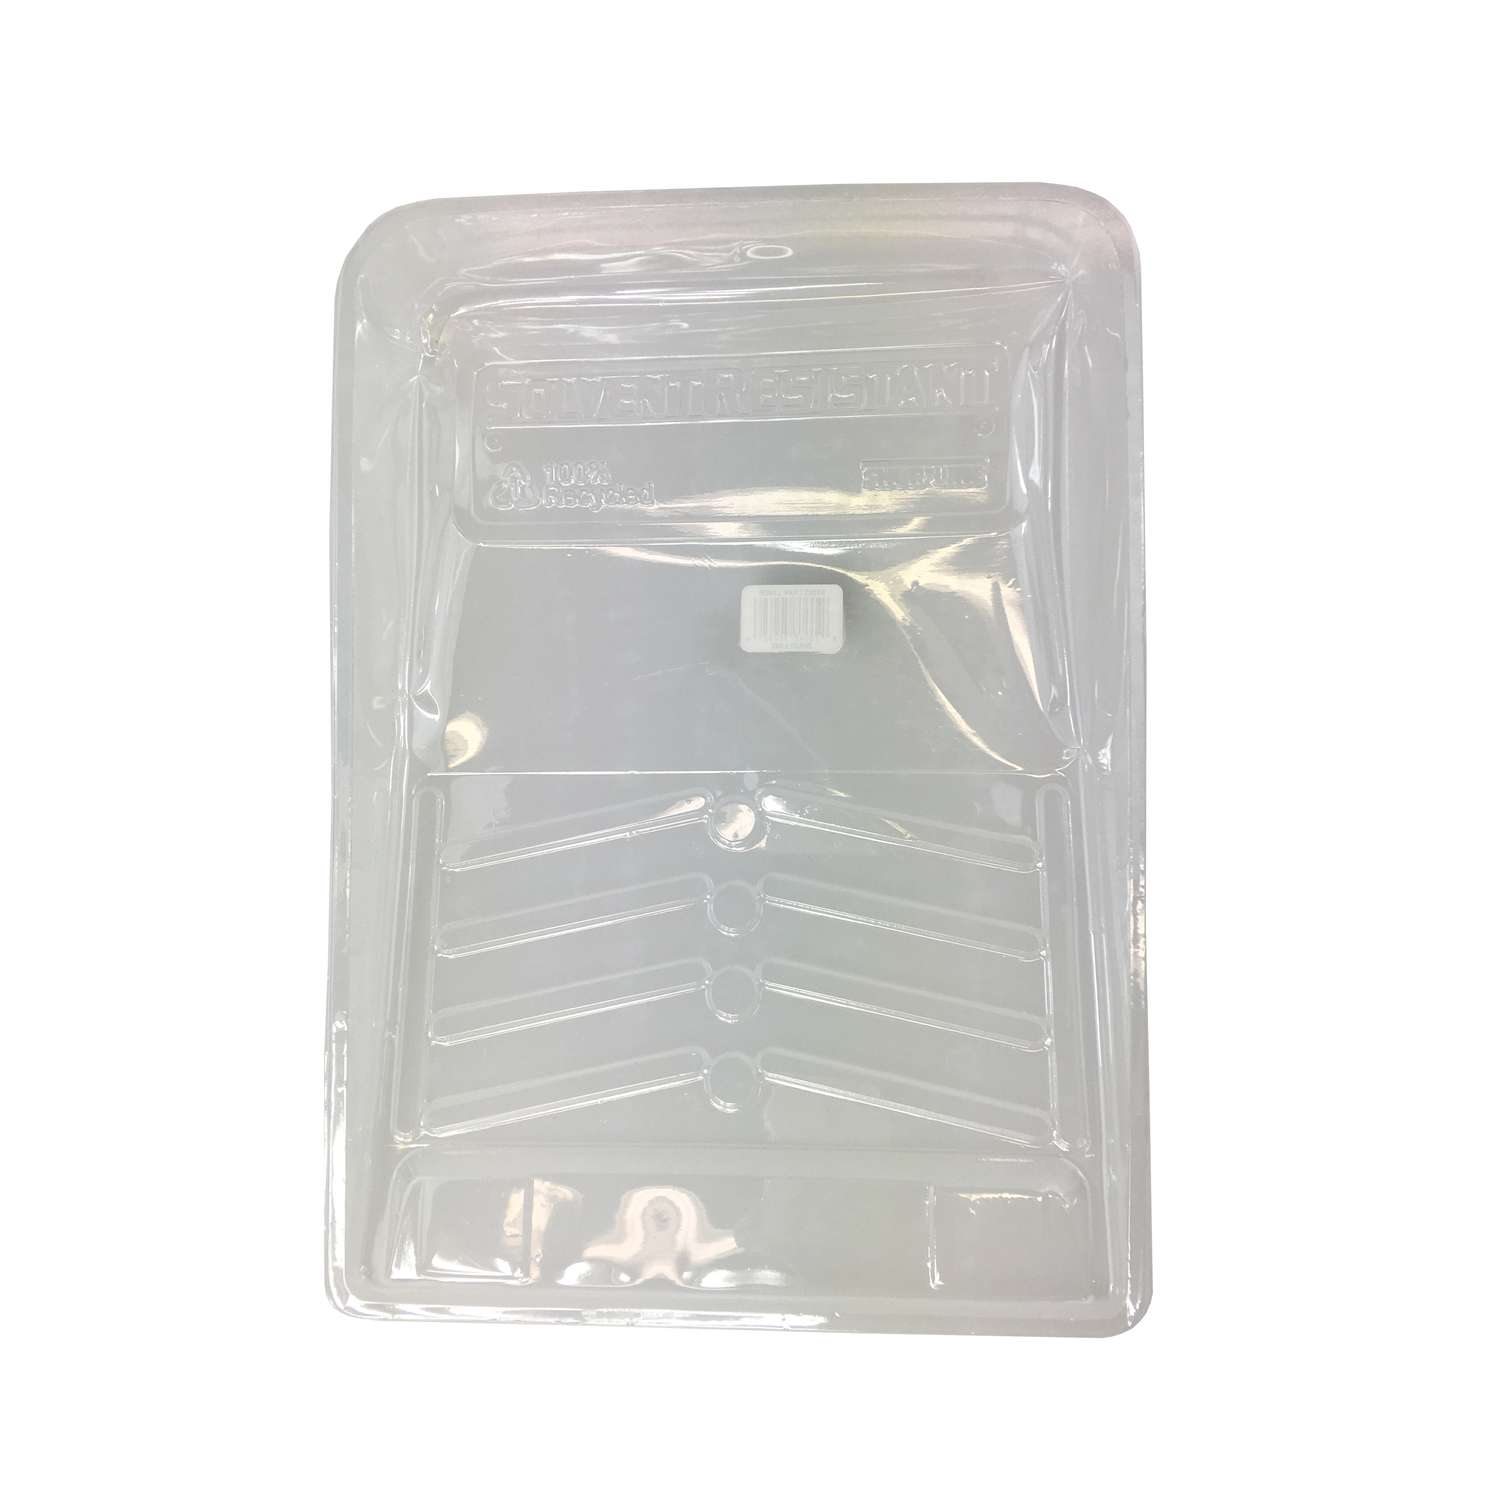 Shur Line Plastic 11 In 14 9 In Disposable Paint Tray Liner